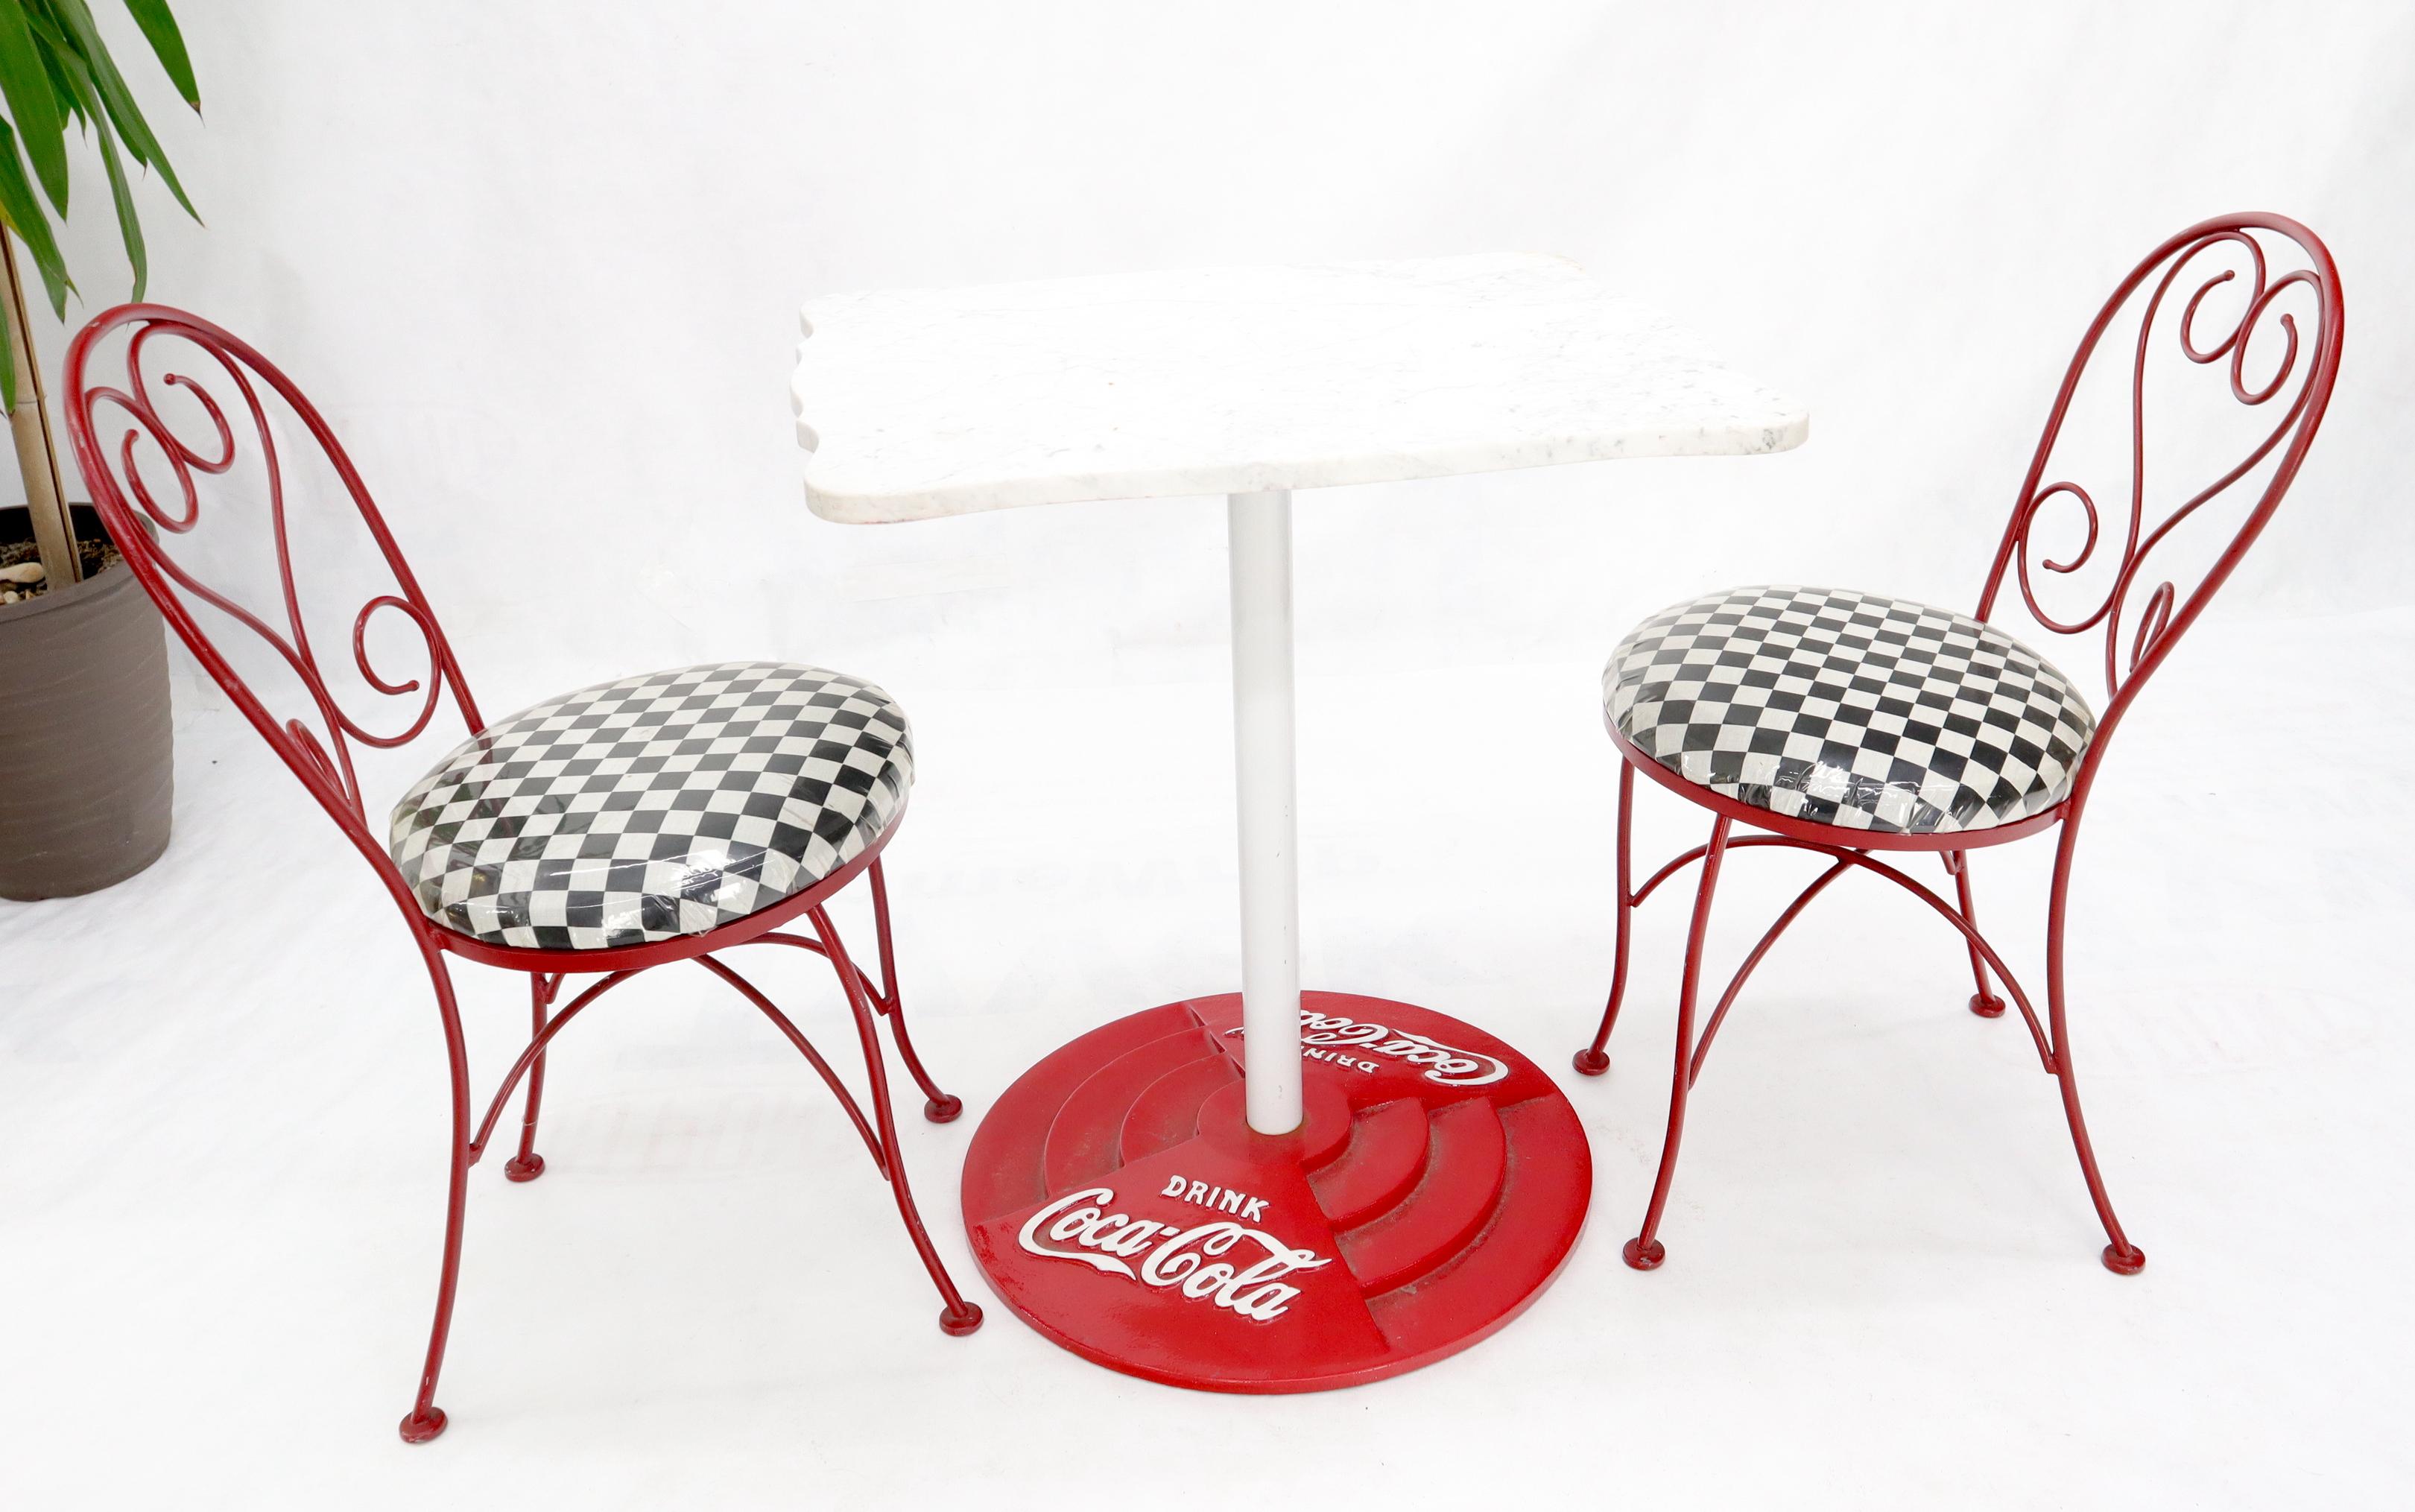 American Two Chairs Cast Iron Marble-Top Table Coca-Cola Dinette Ice Cream Set Cafe Table For Sale